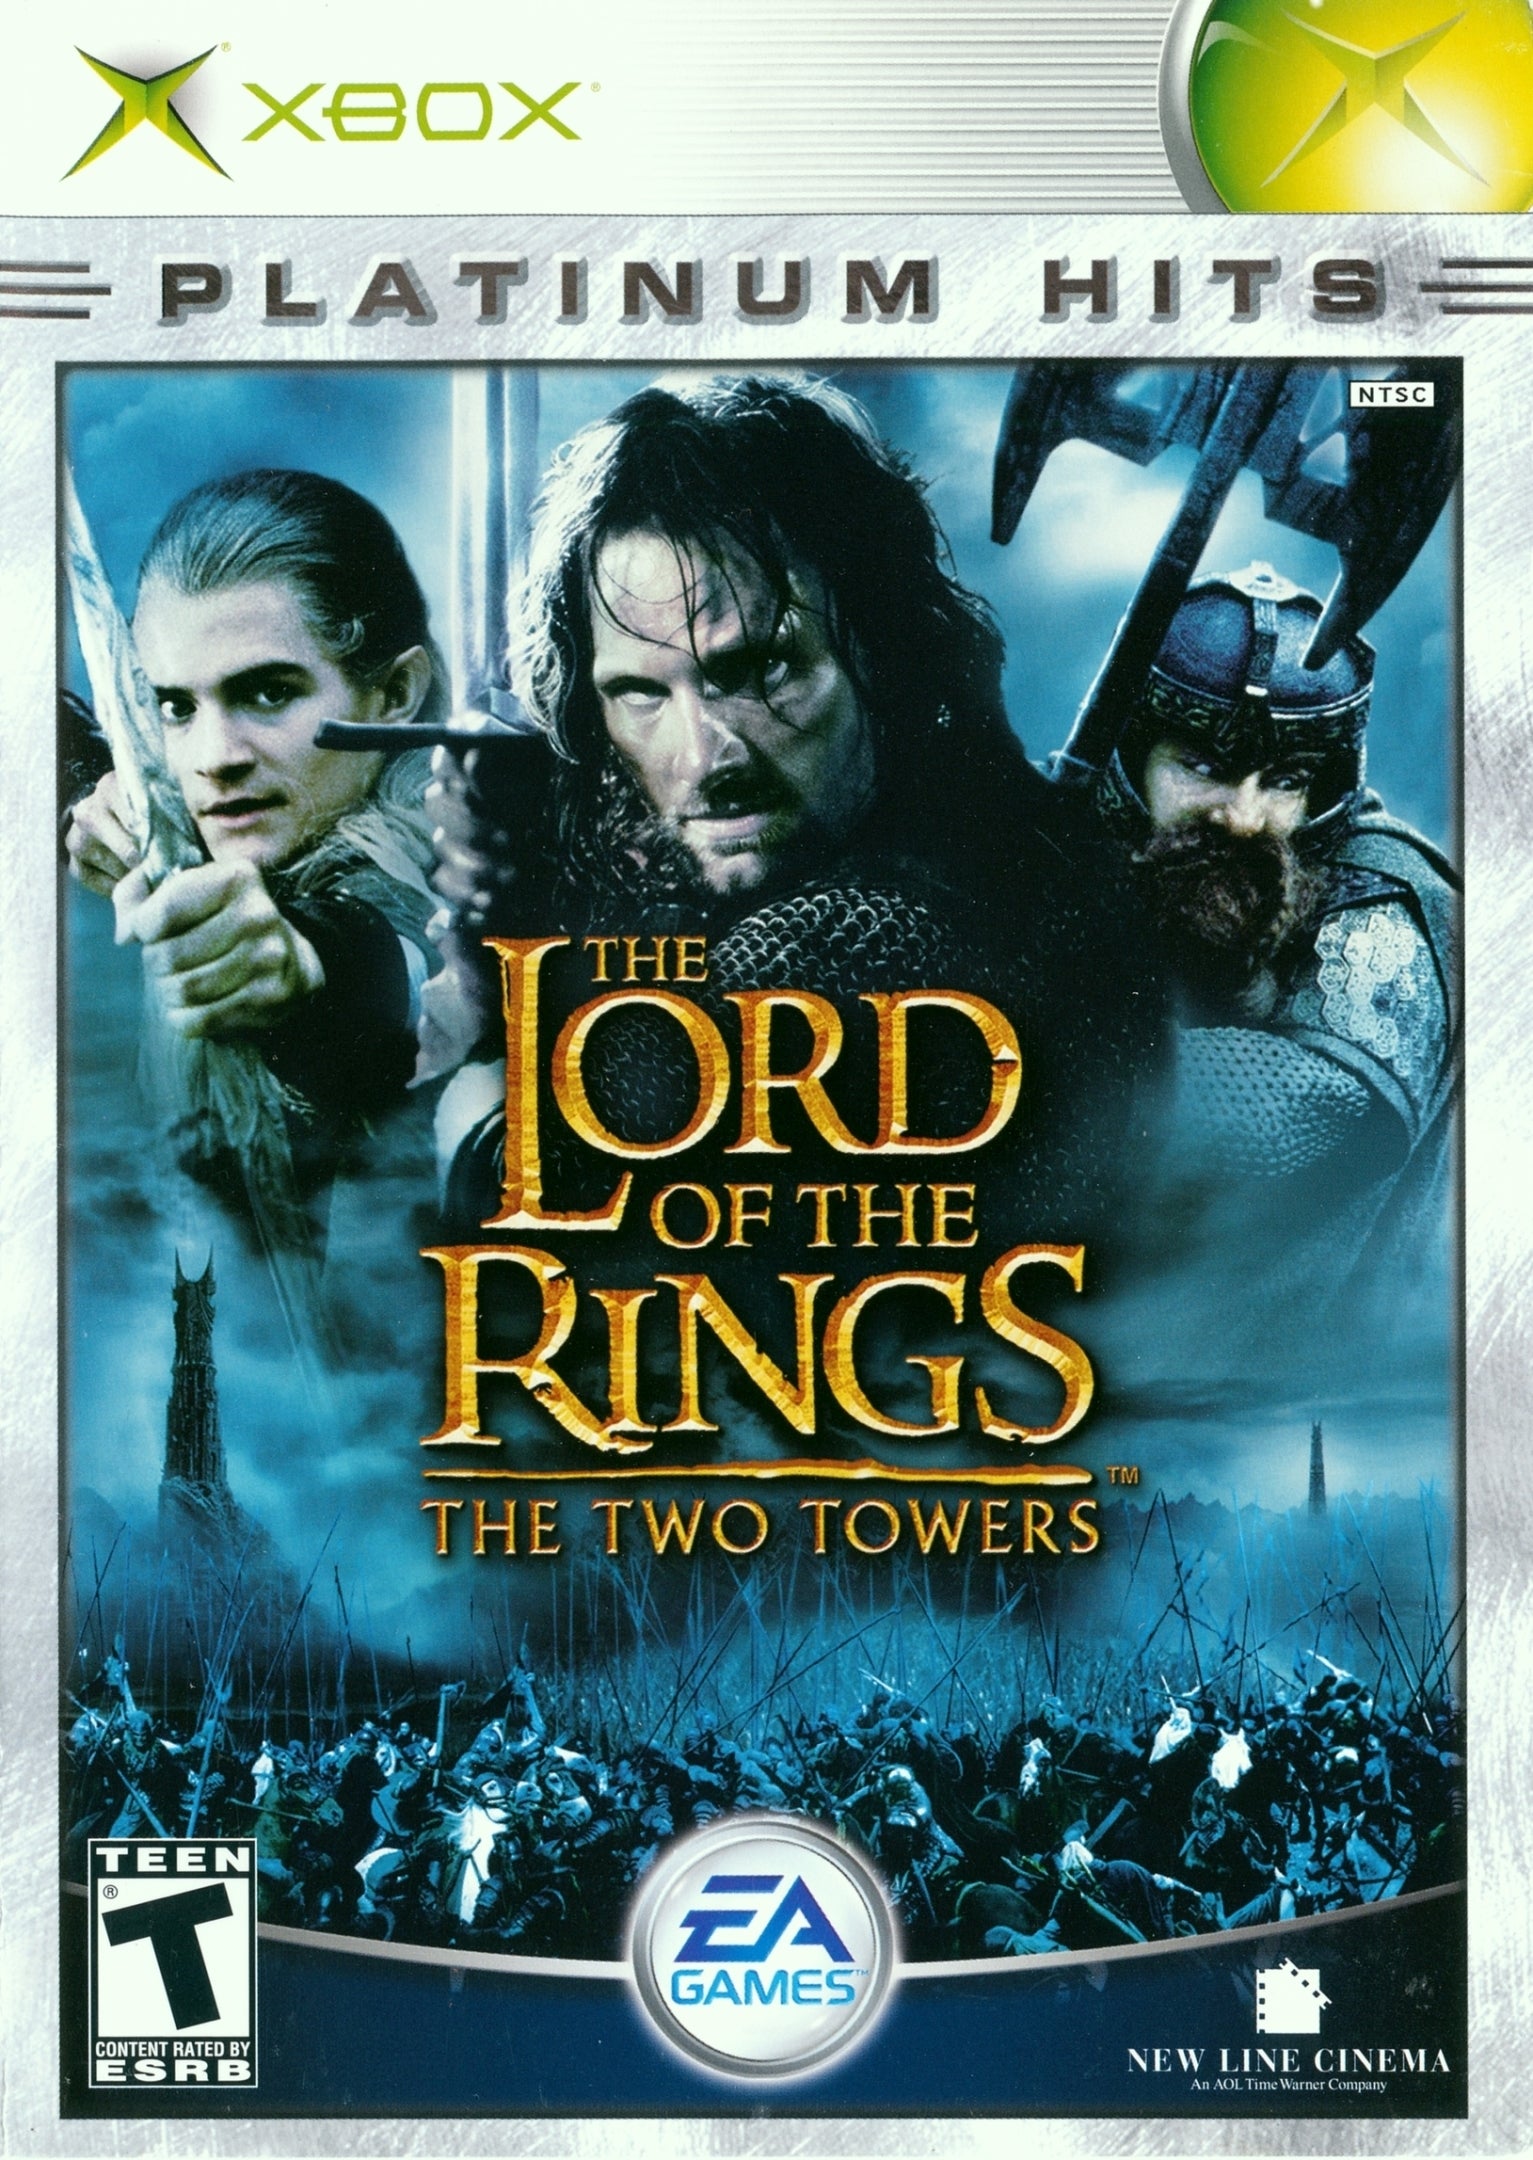 The Lord of the Rings: The Two Towers (Platinum Hits) - (XB) Xbox Video Games EA Games   